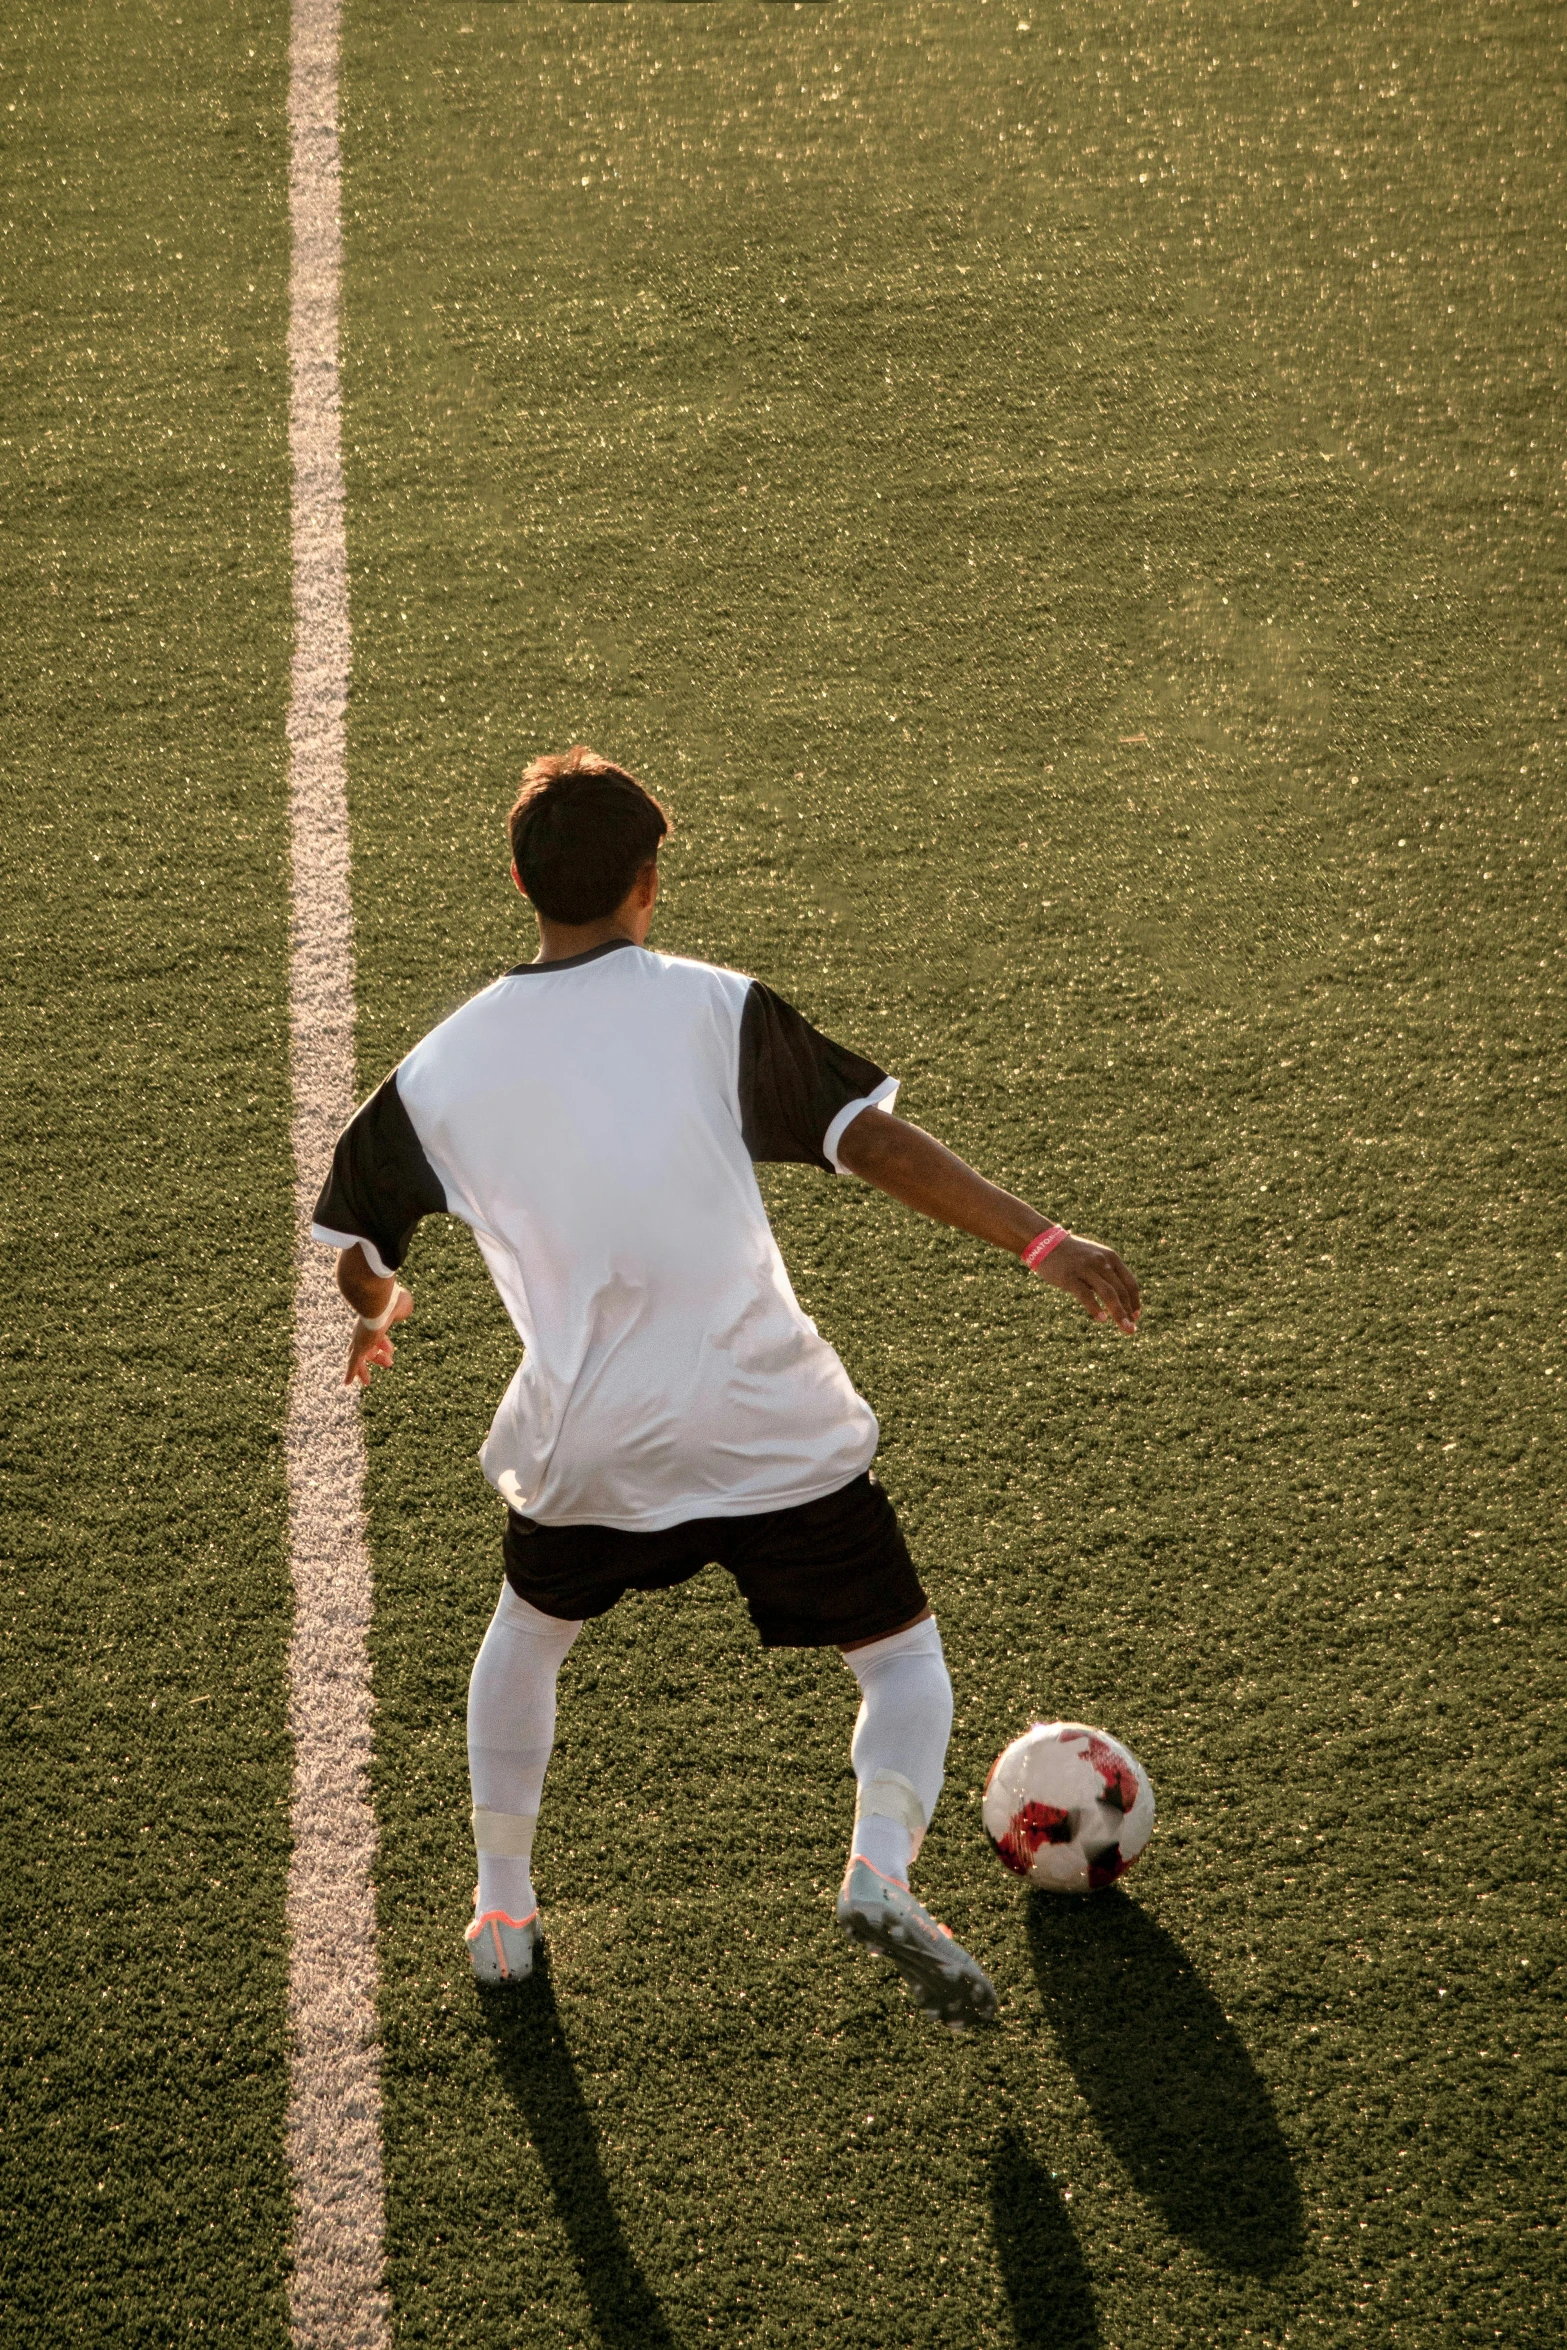 a man on a field playing with a soccer ball